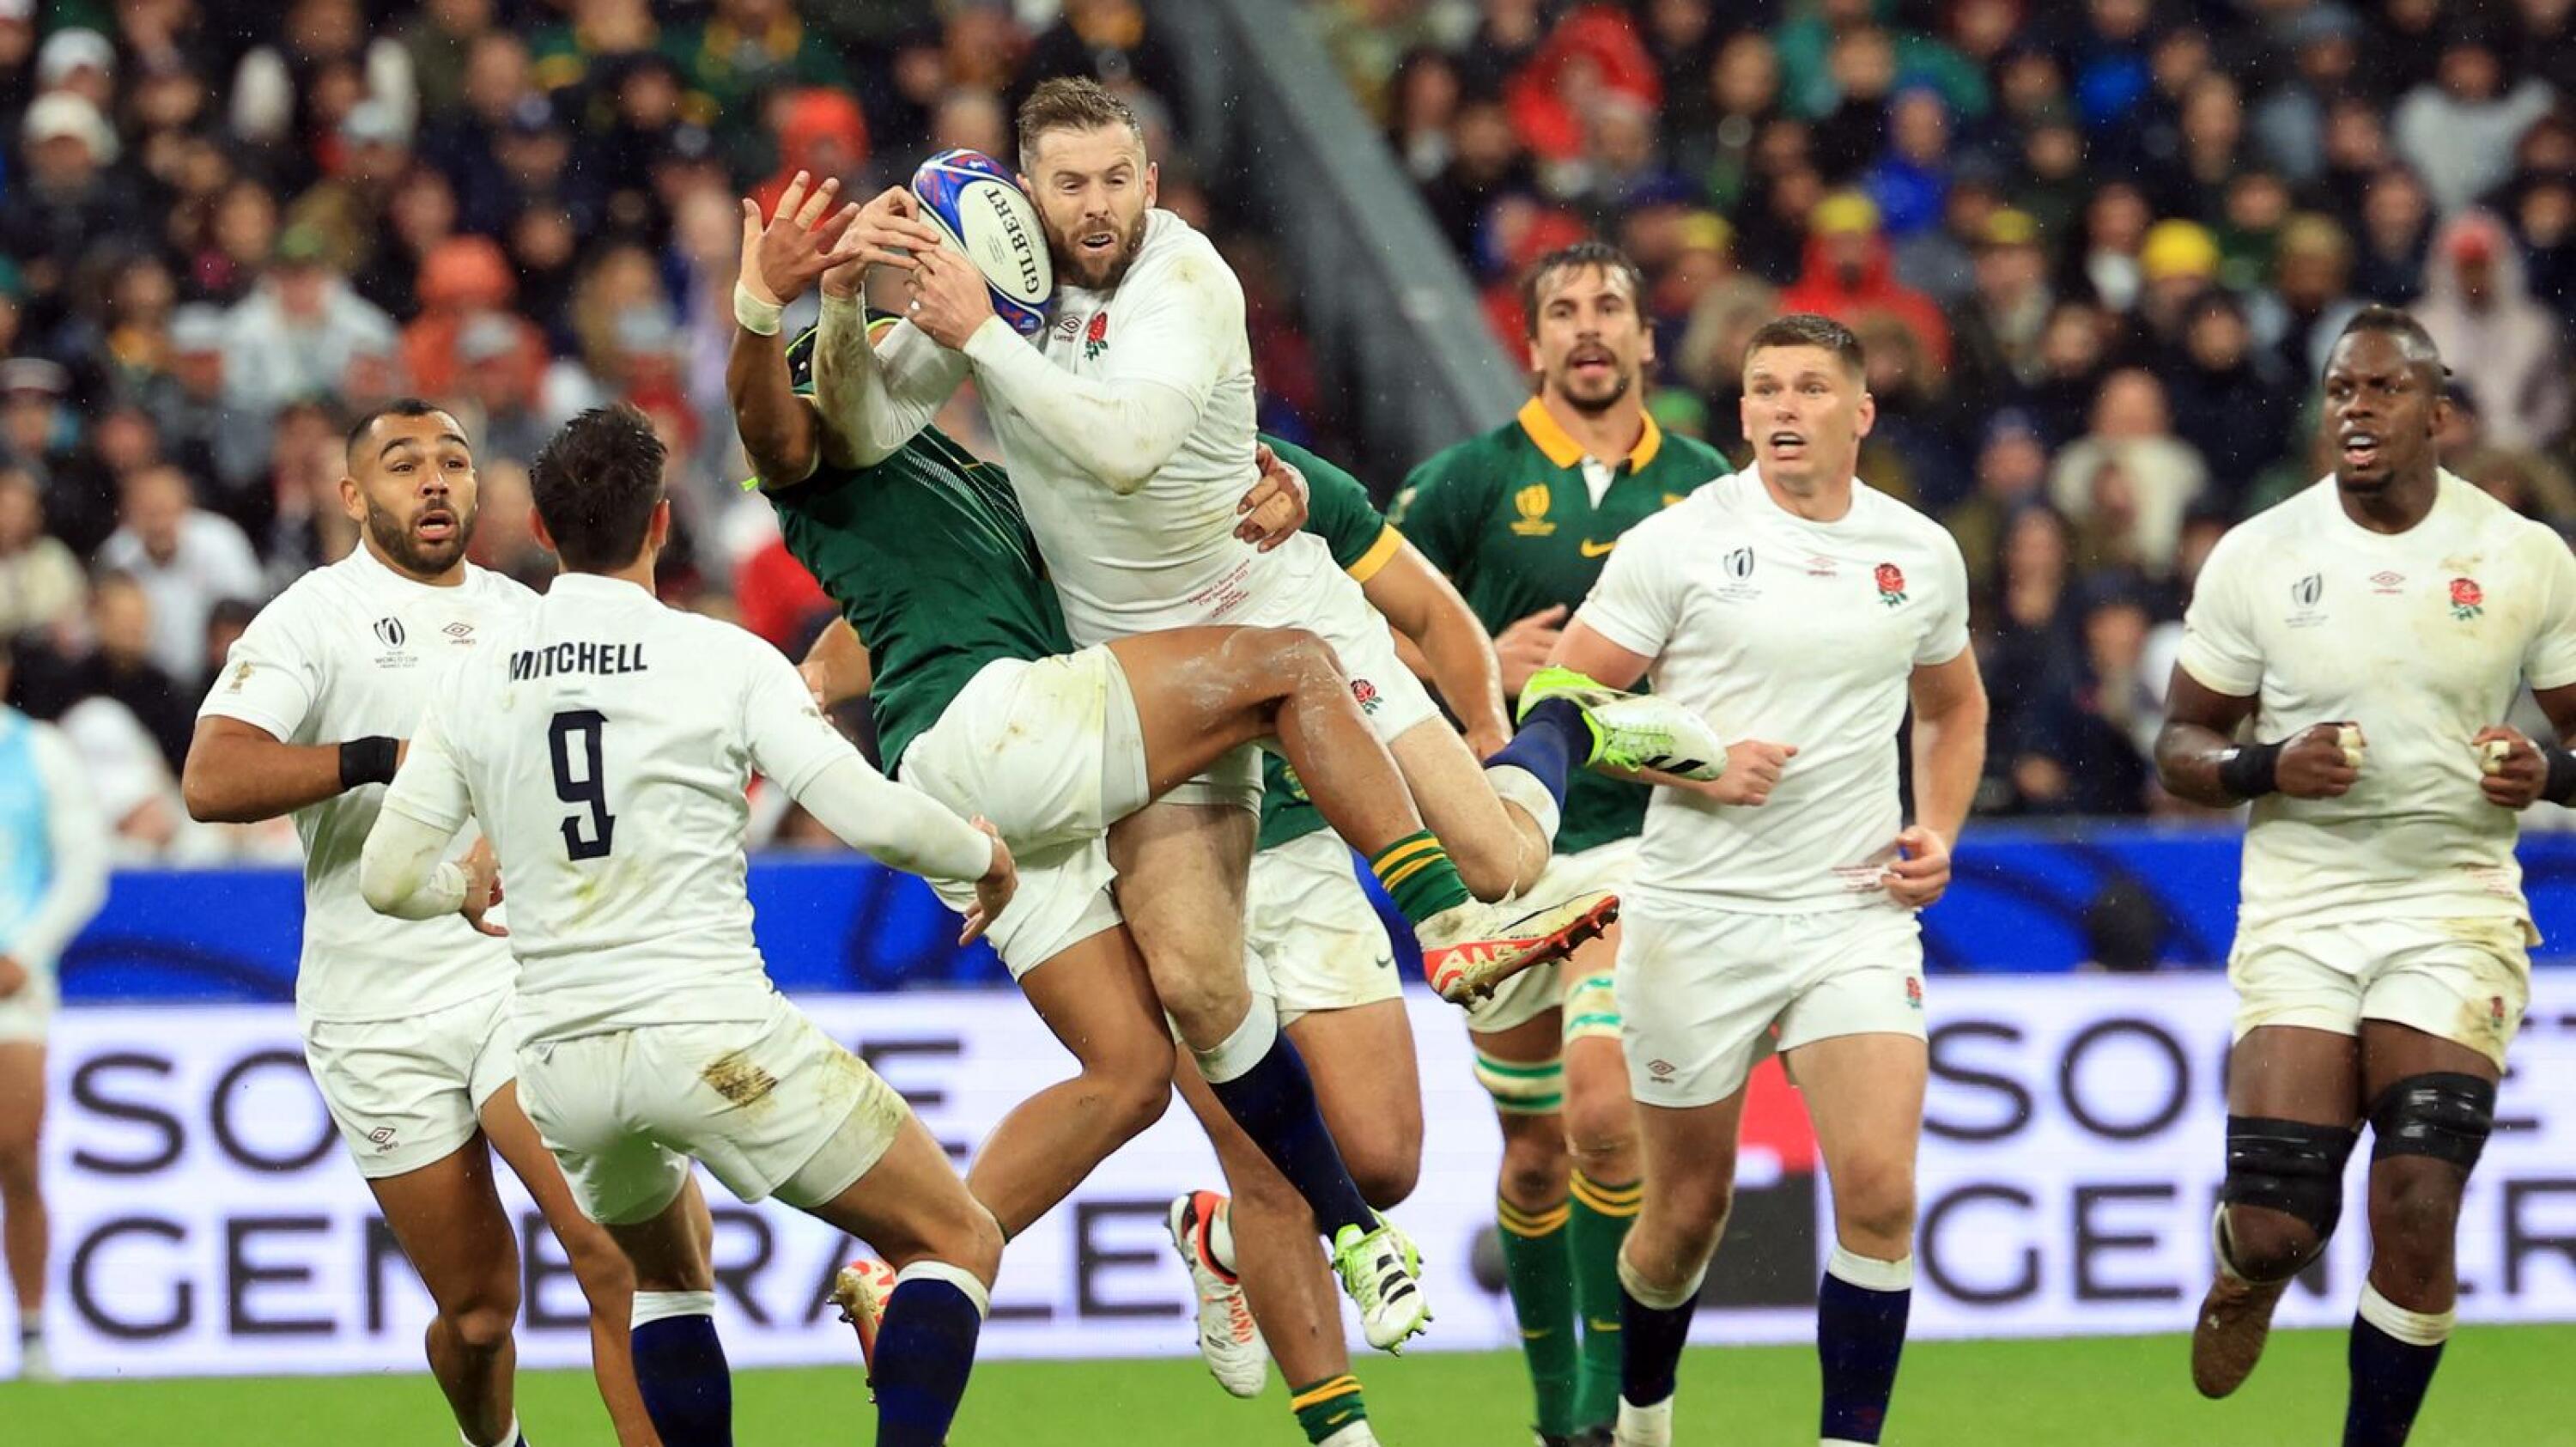 England’s Freddie Steward out jumps South Africa's Kurt-Lee Arendse during Saturday’s Rugby World Cup semi-final at the Stade de France